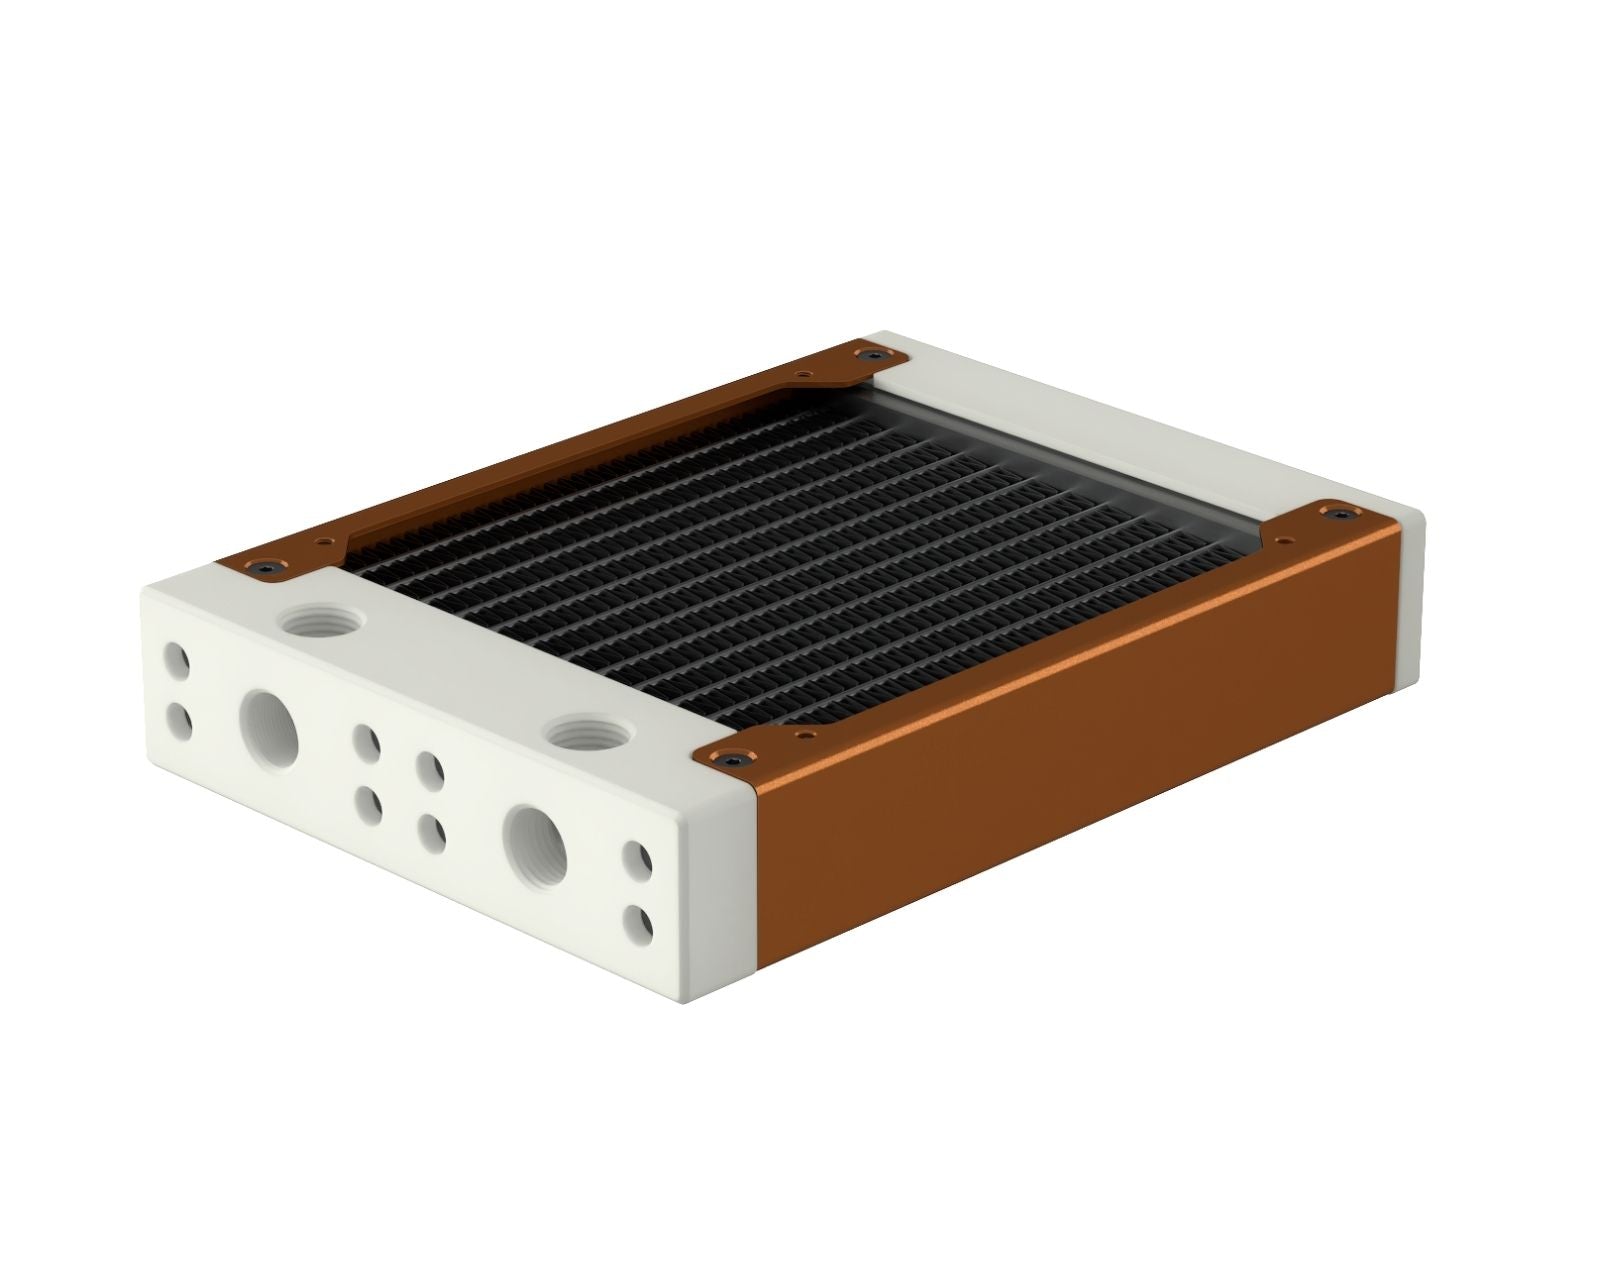 PrimoChill 120SL (30mm) EXIMO Modular Radiator, White POM, 1x120mm, Single Fan (R-SL-W12) Available in 20+ Colors, Assembled in USA and Custom Watercooling Loop Ready - Copper